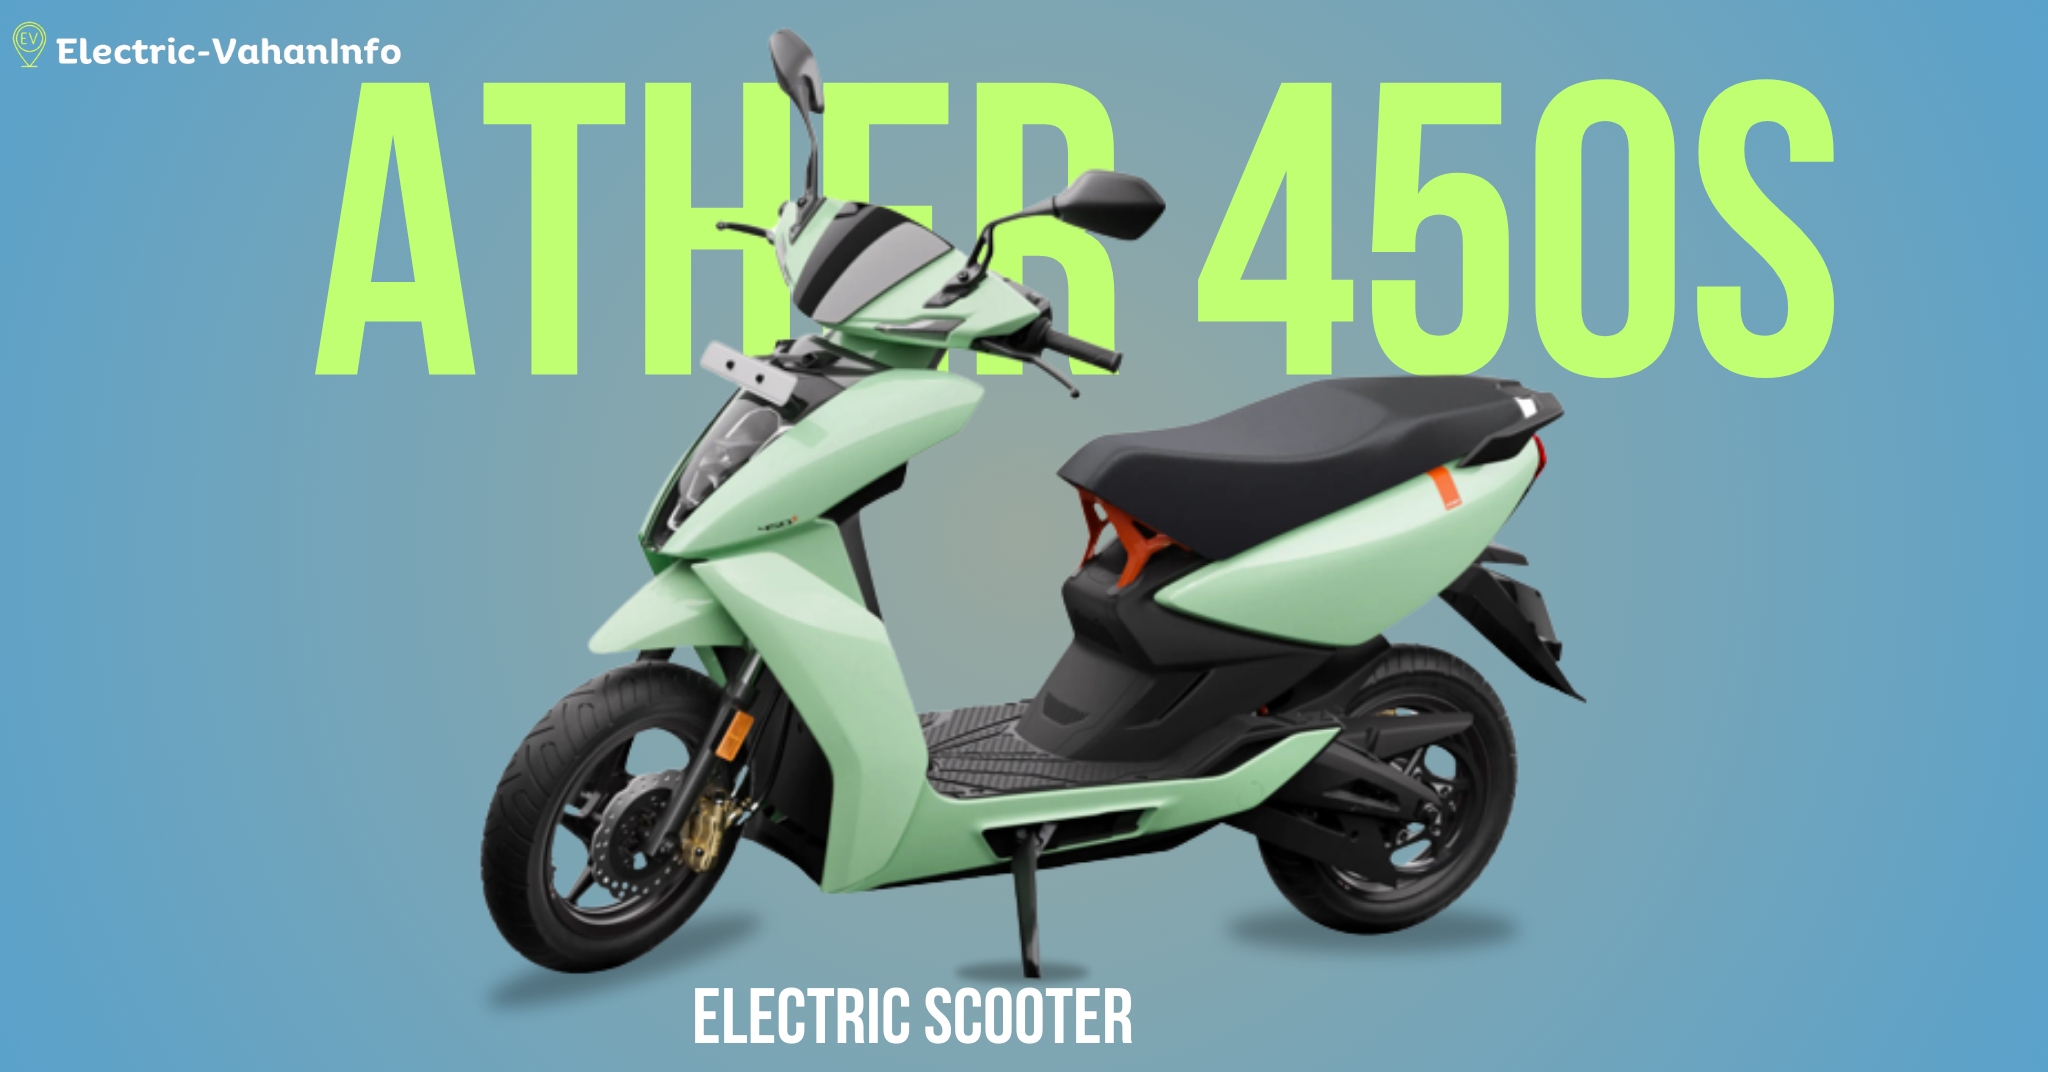 https://electric-vahaninfo.com/ather-450s-electric-scooter-price-range-and-specifications/